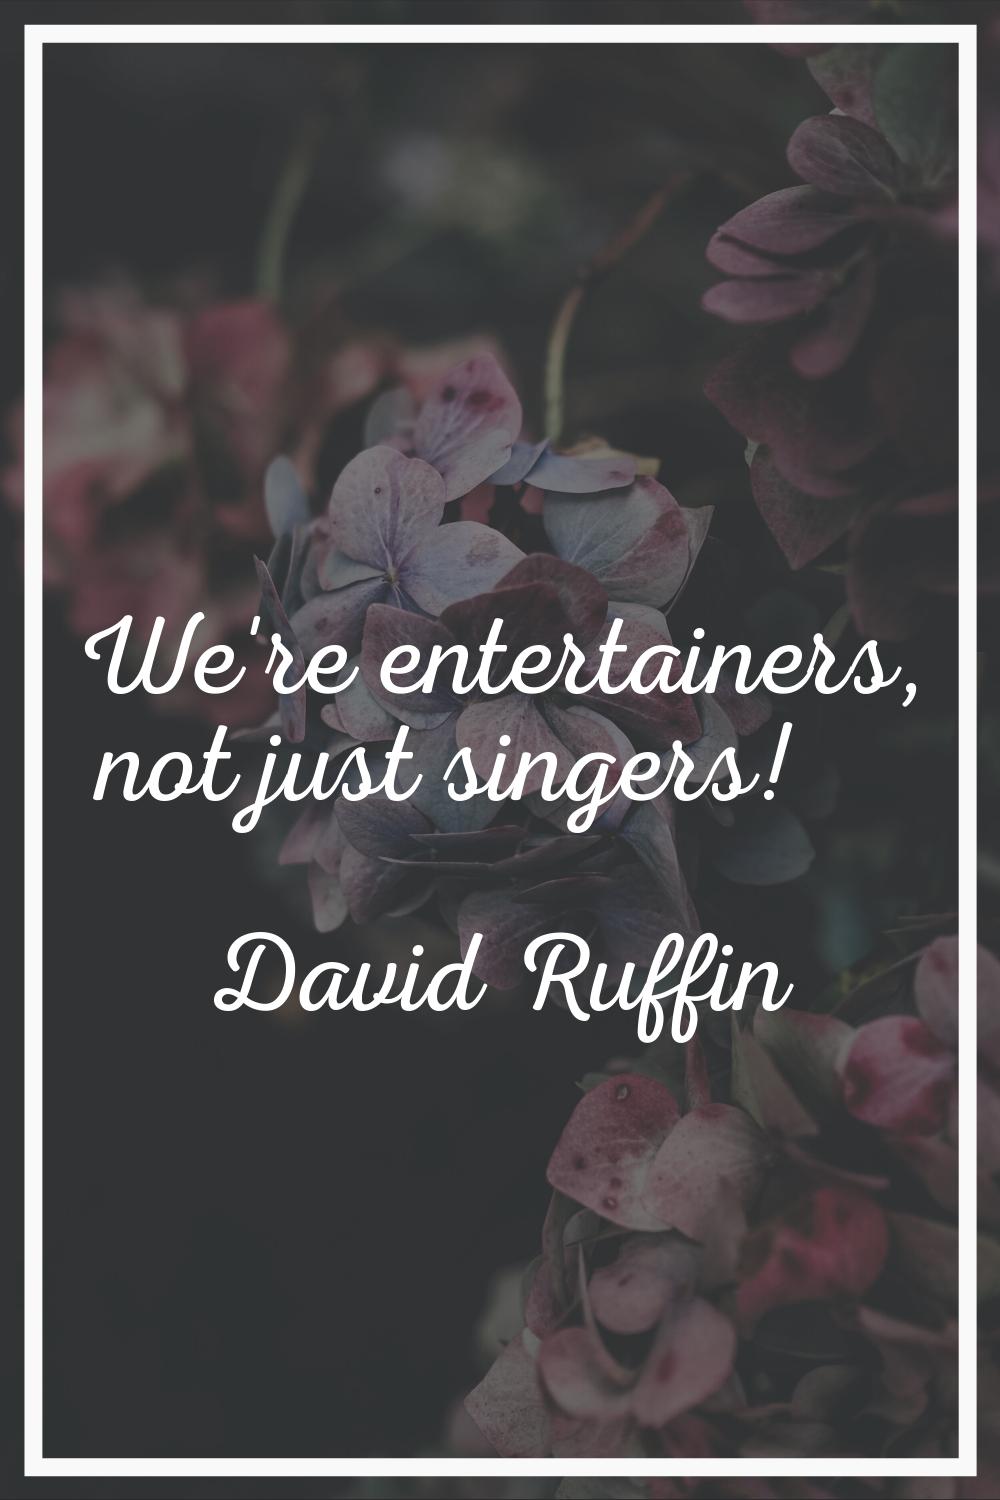 We're entertainers, not just singers!